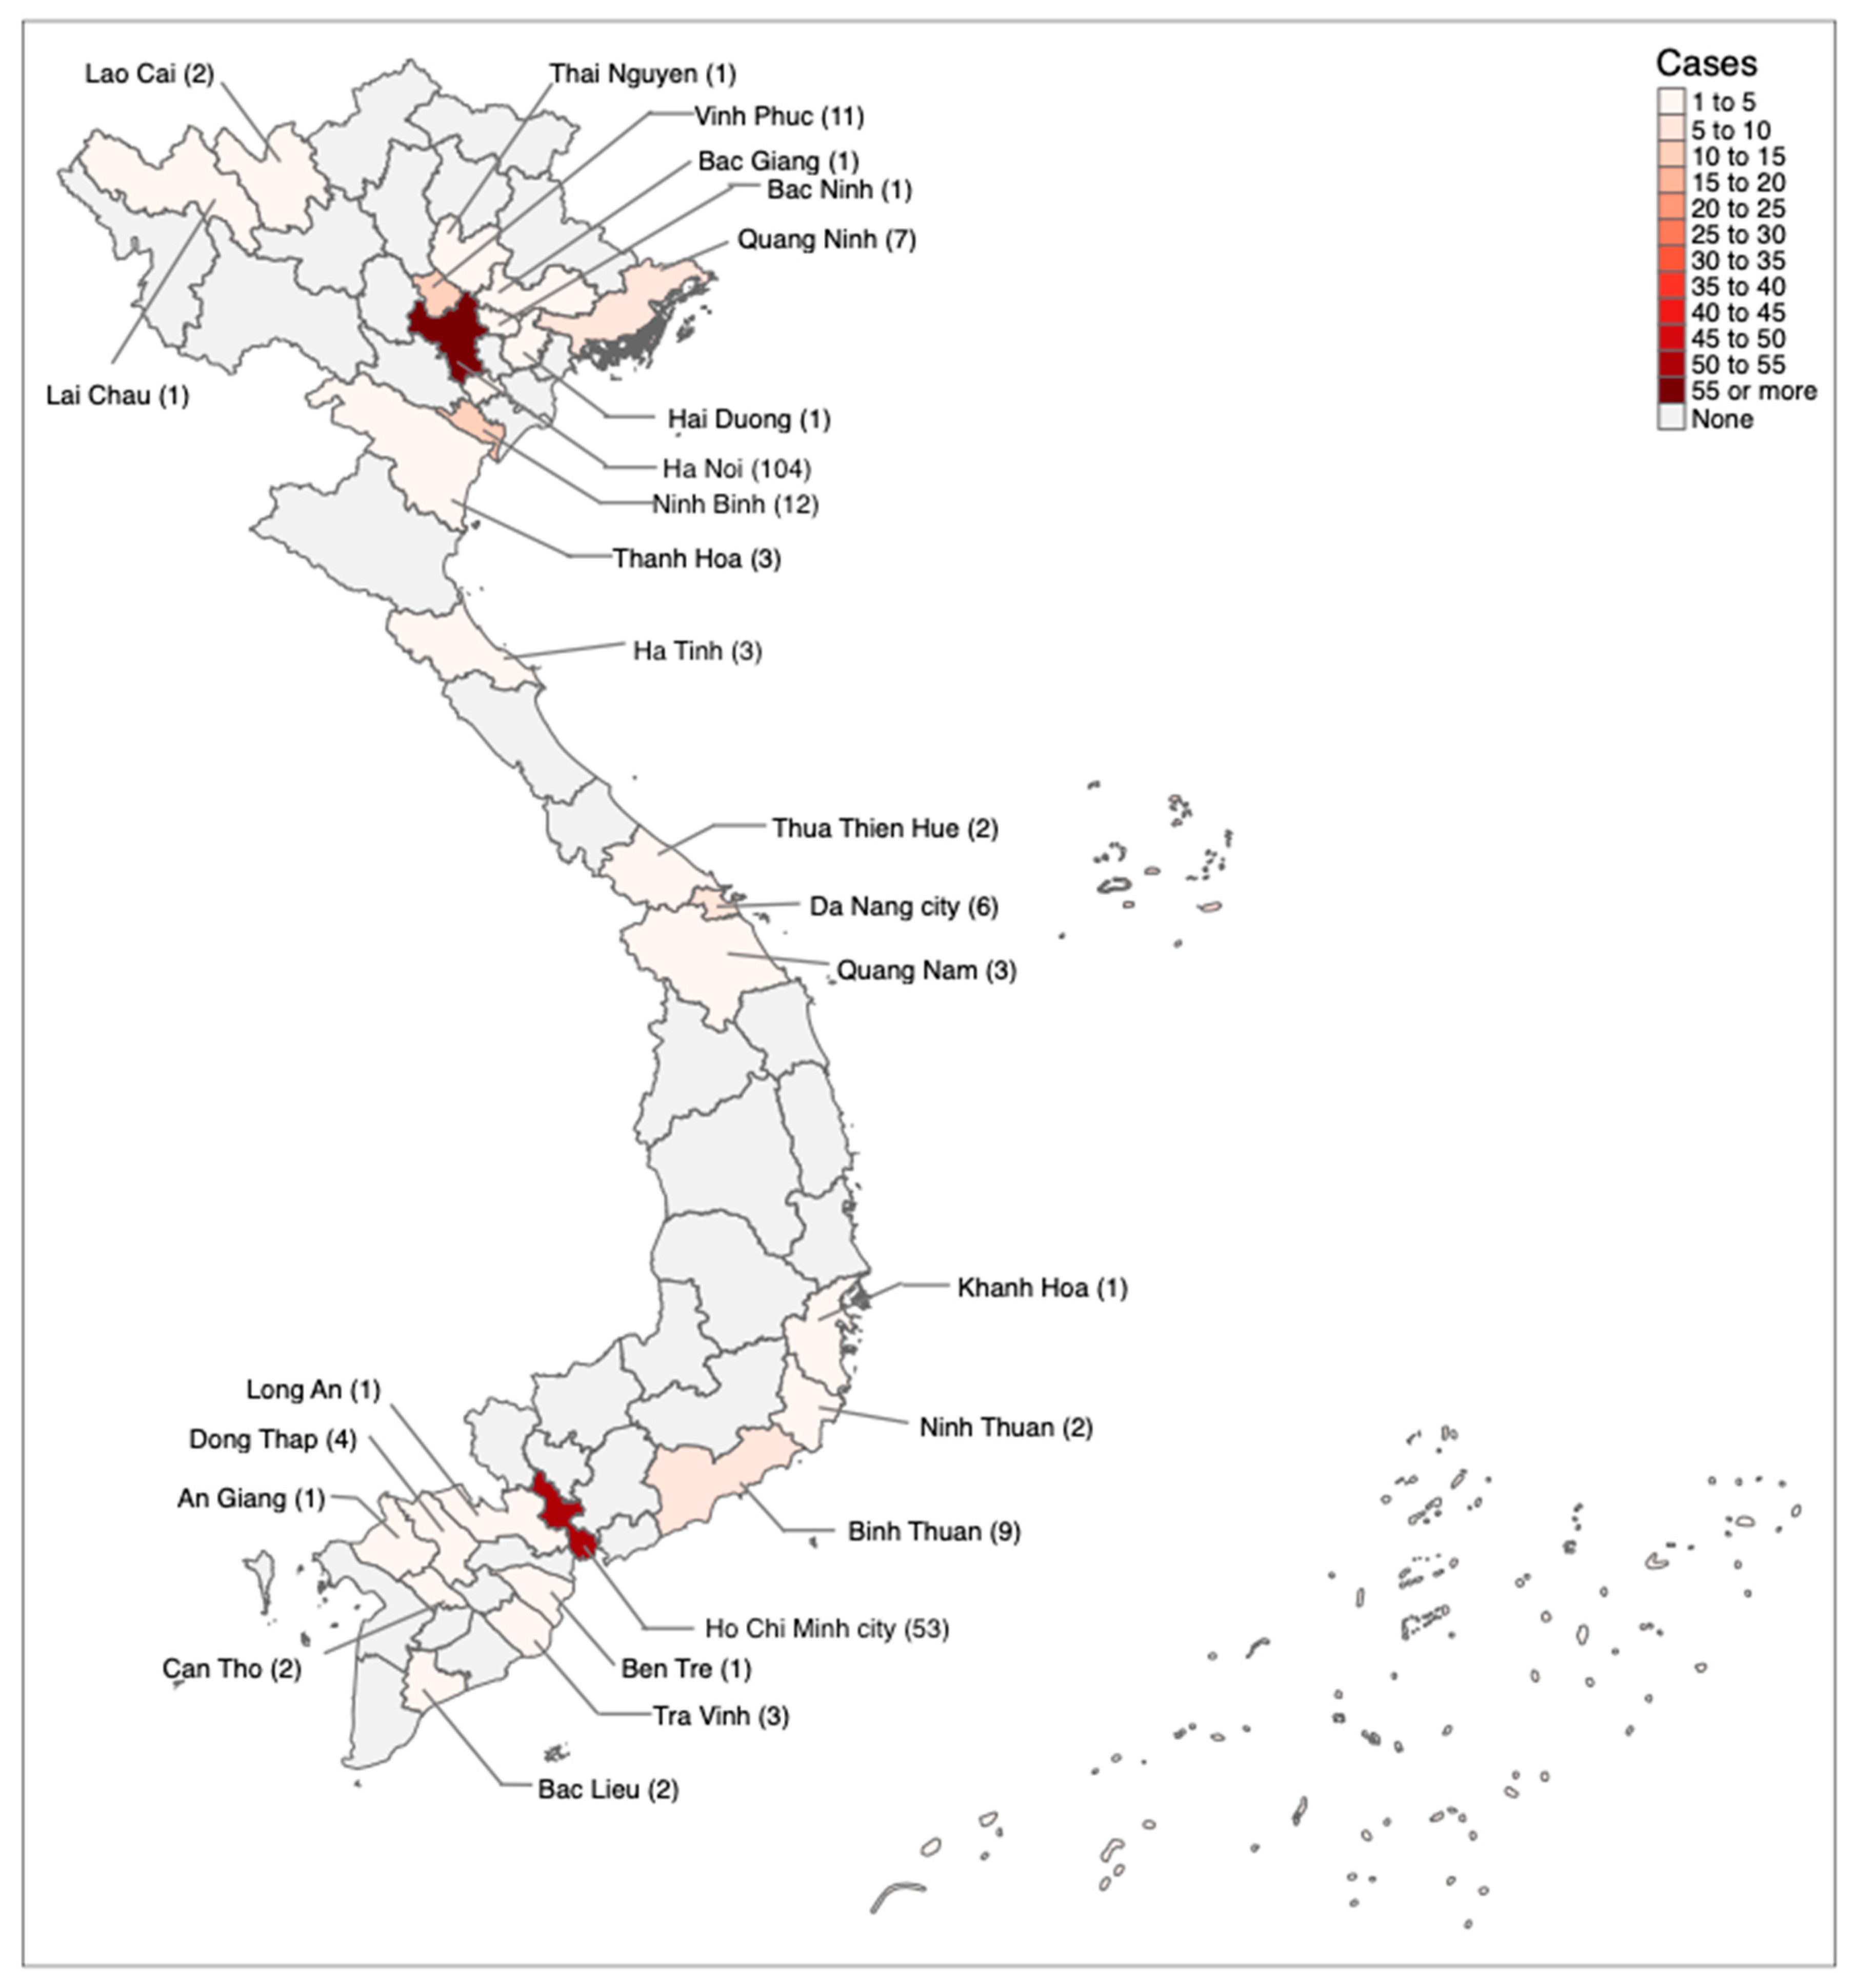 Sustainability | Free Full-Text | Policy Response, Social Media and Science  Journalism for the Sustainability of the Public Health System Amid the  COVID-19 Outbreak: The Vietnam Lessons | HTML